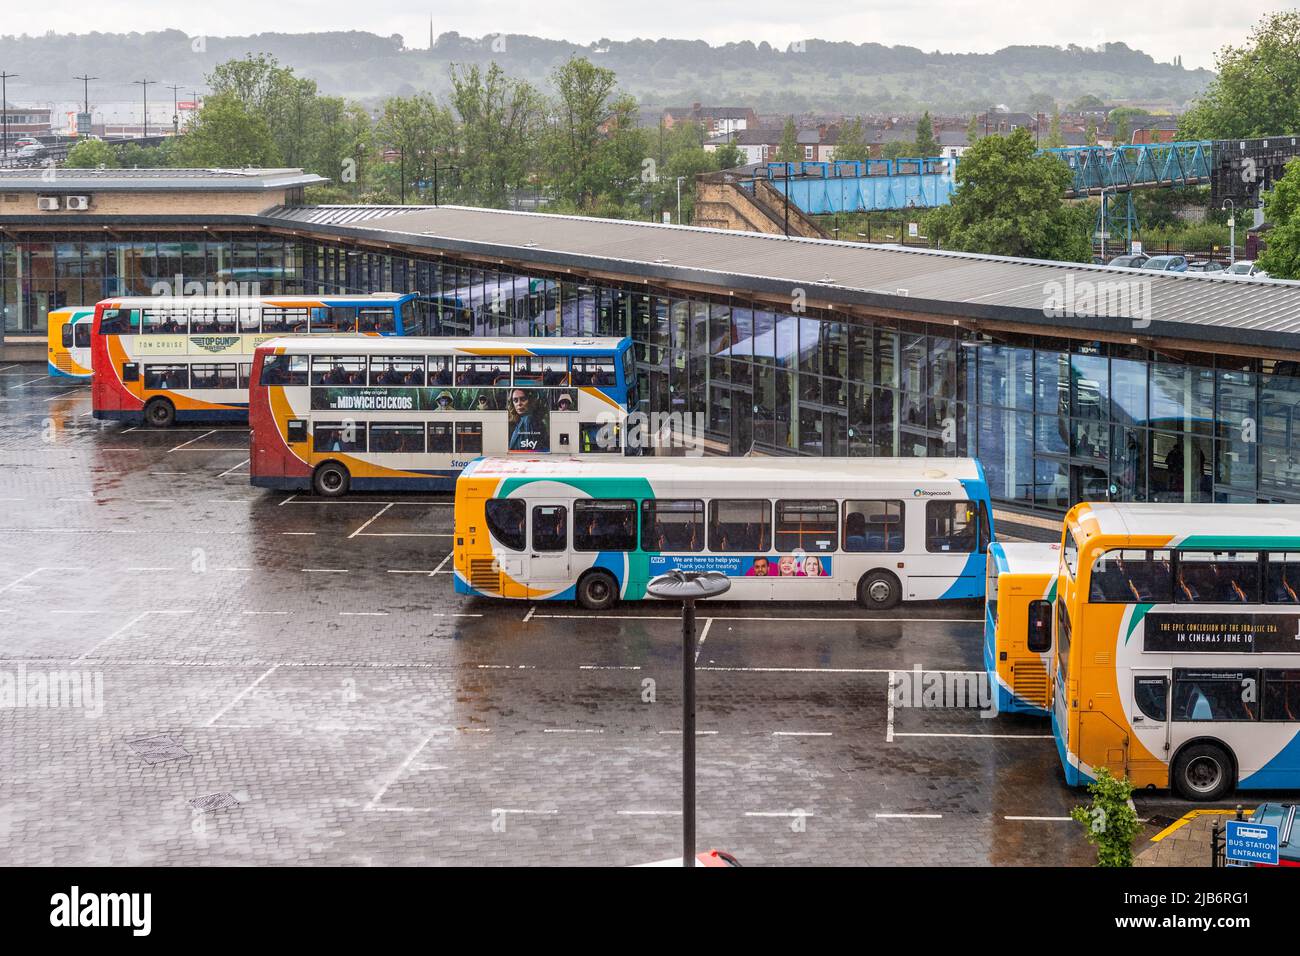 Lincoln Central Bus Station, Lincoln, Lincolnshire, UK. Stock Photo